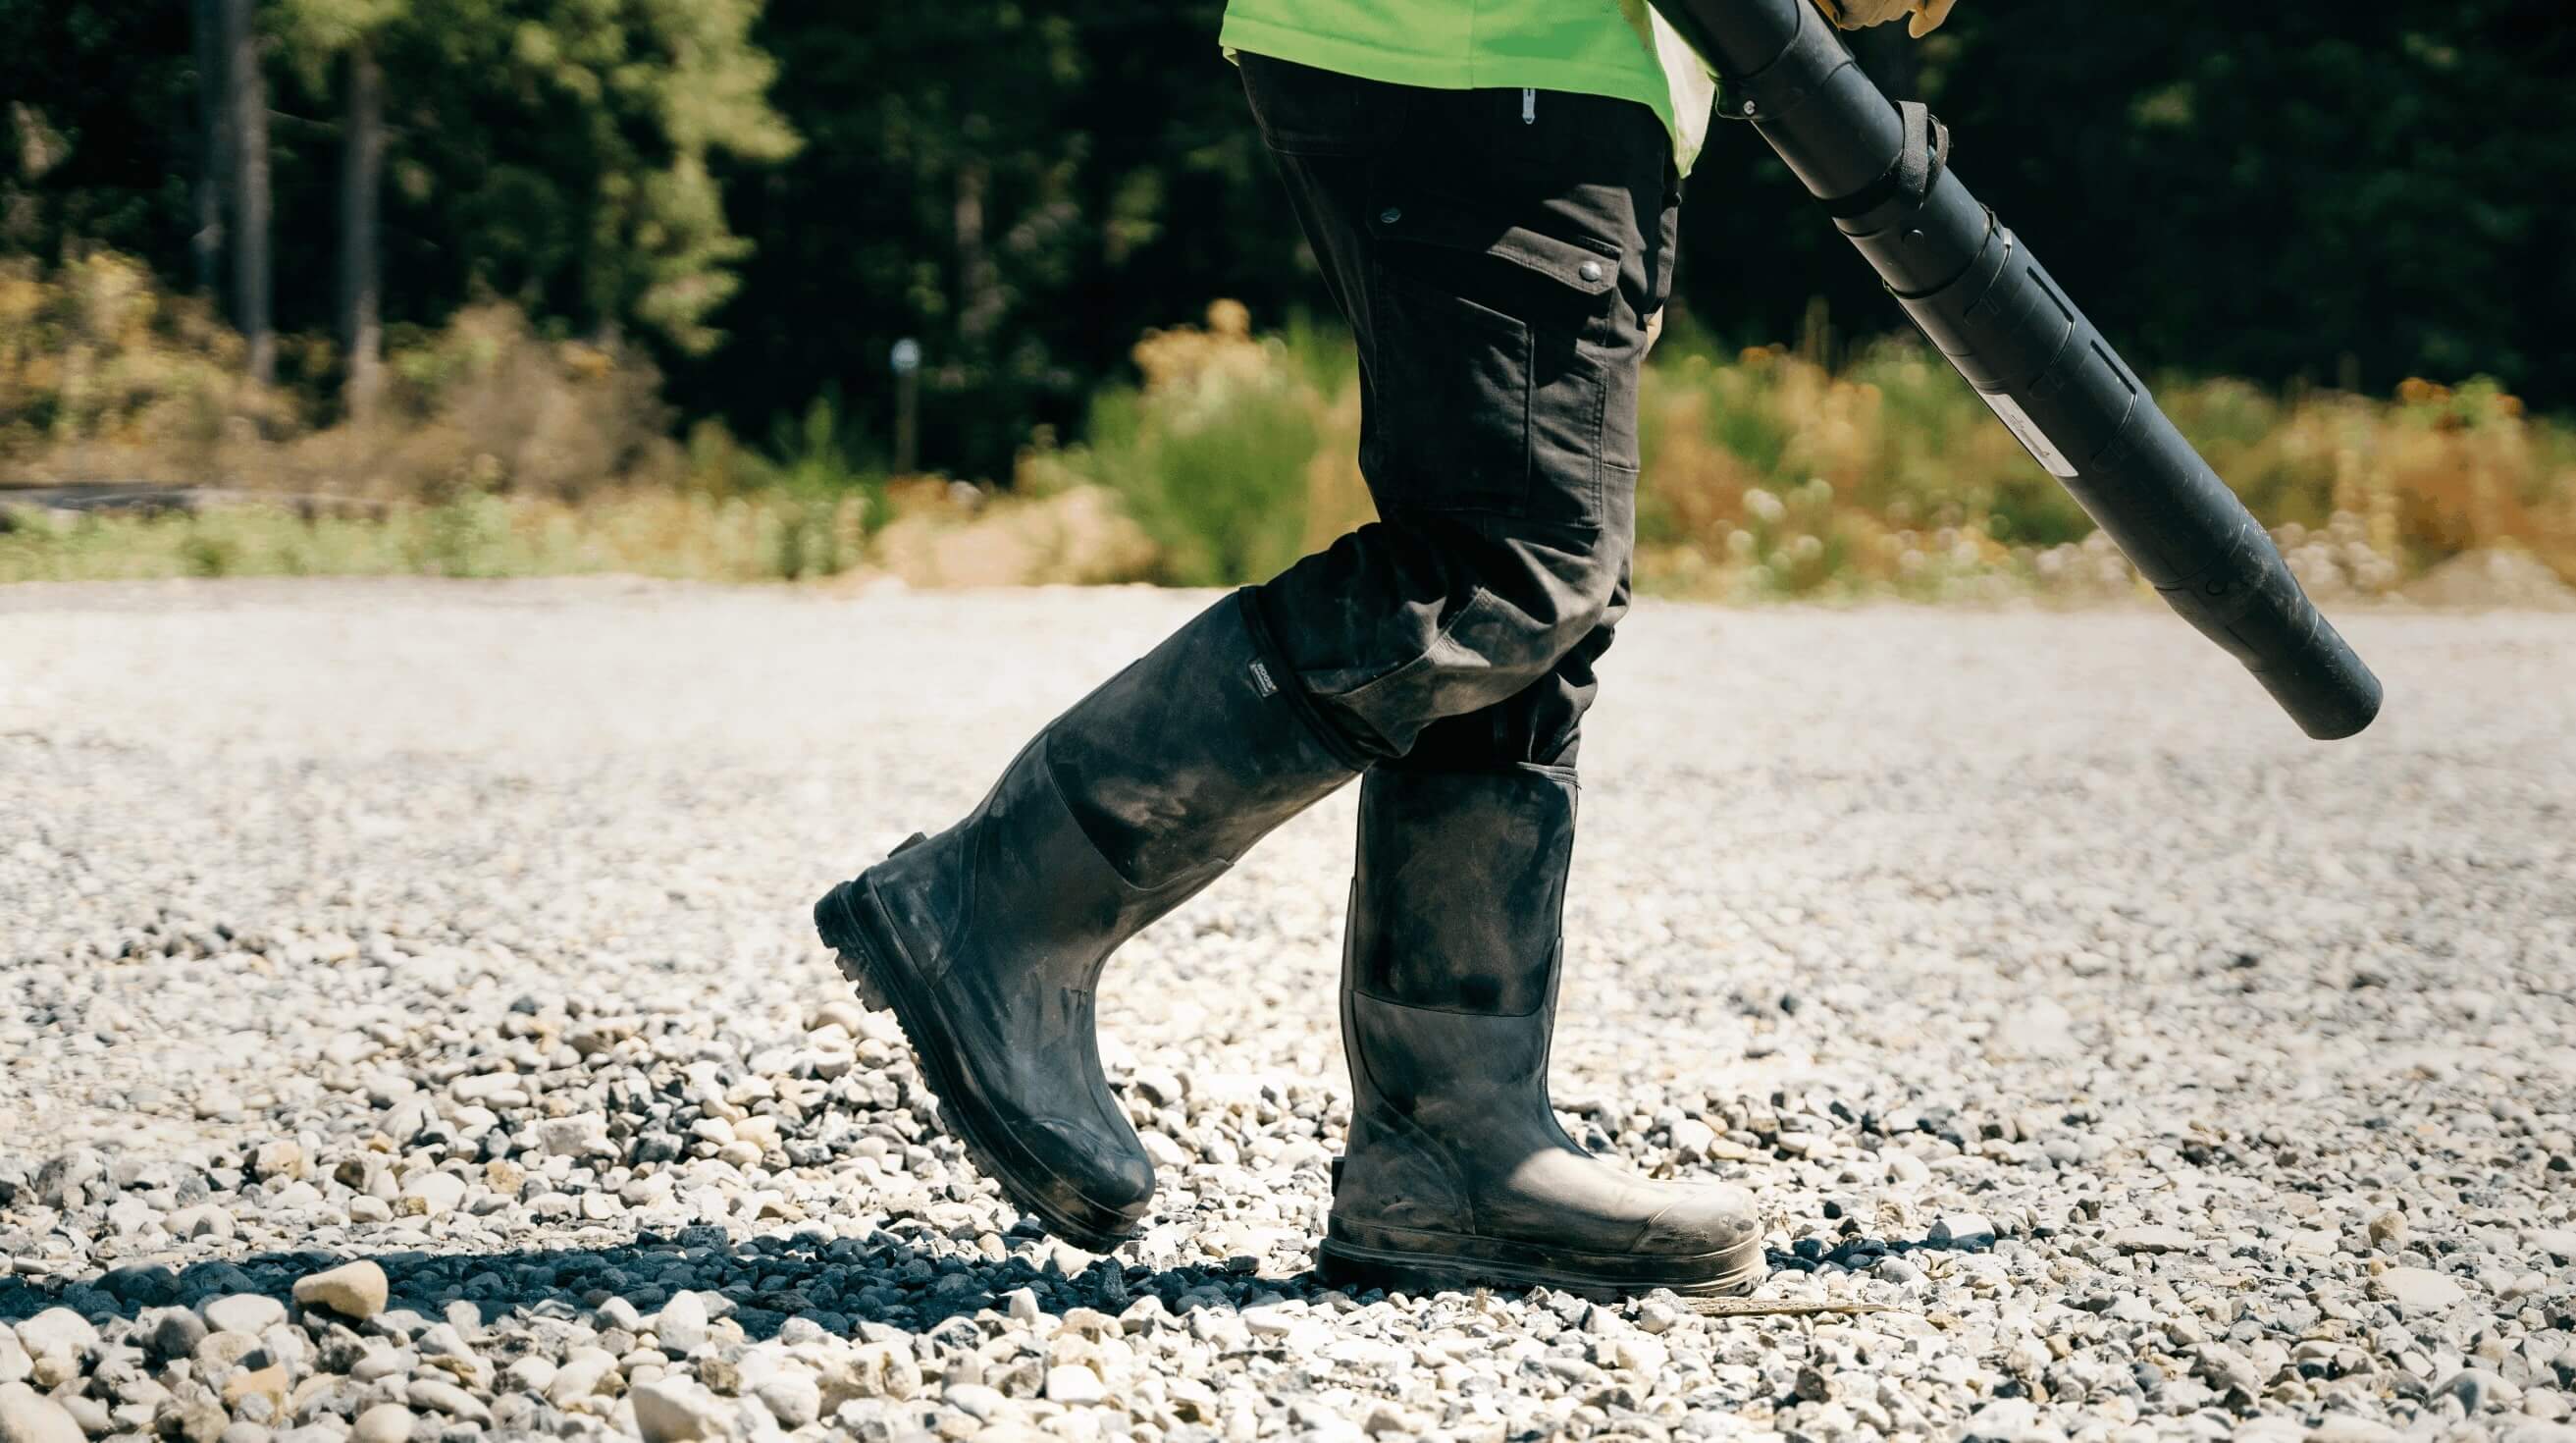 Shop the Men’s Rancher waterproof work boot. The featured product is the Men’s Rancher in Black